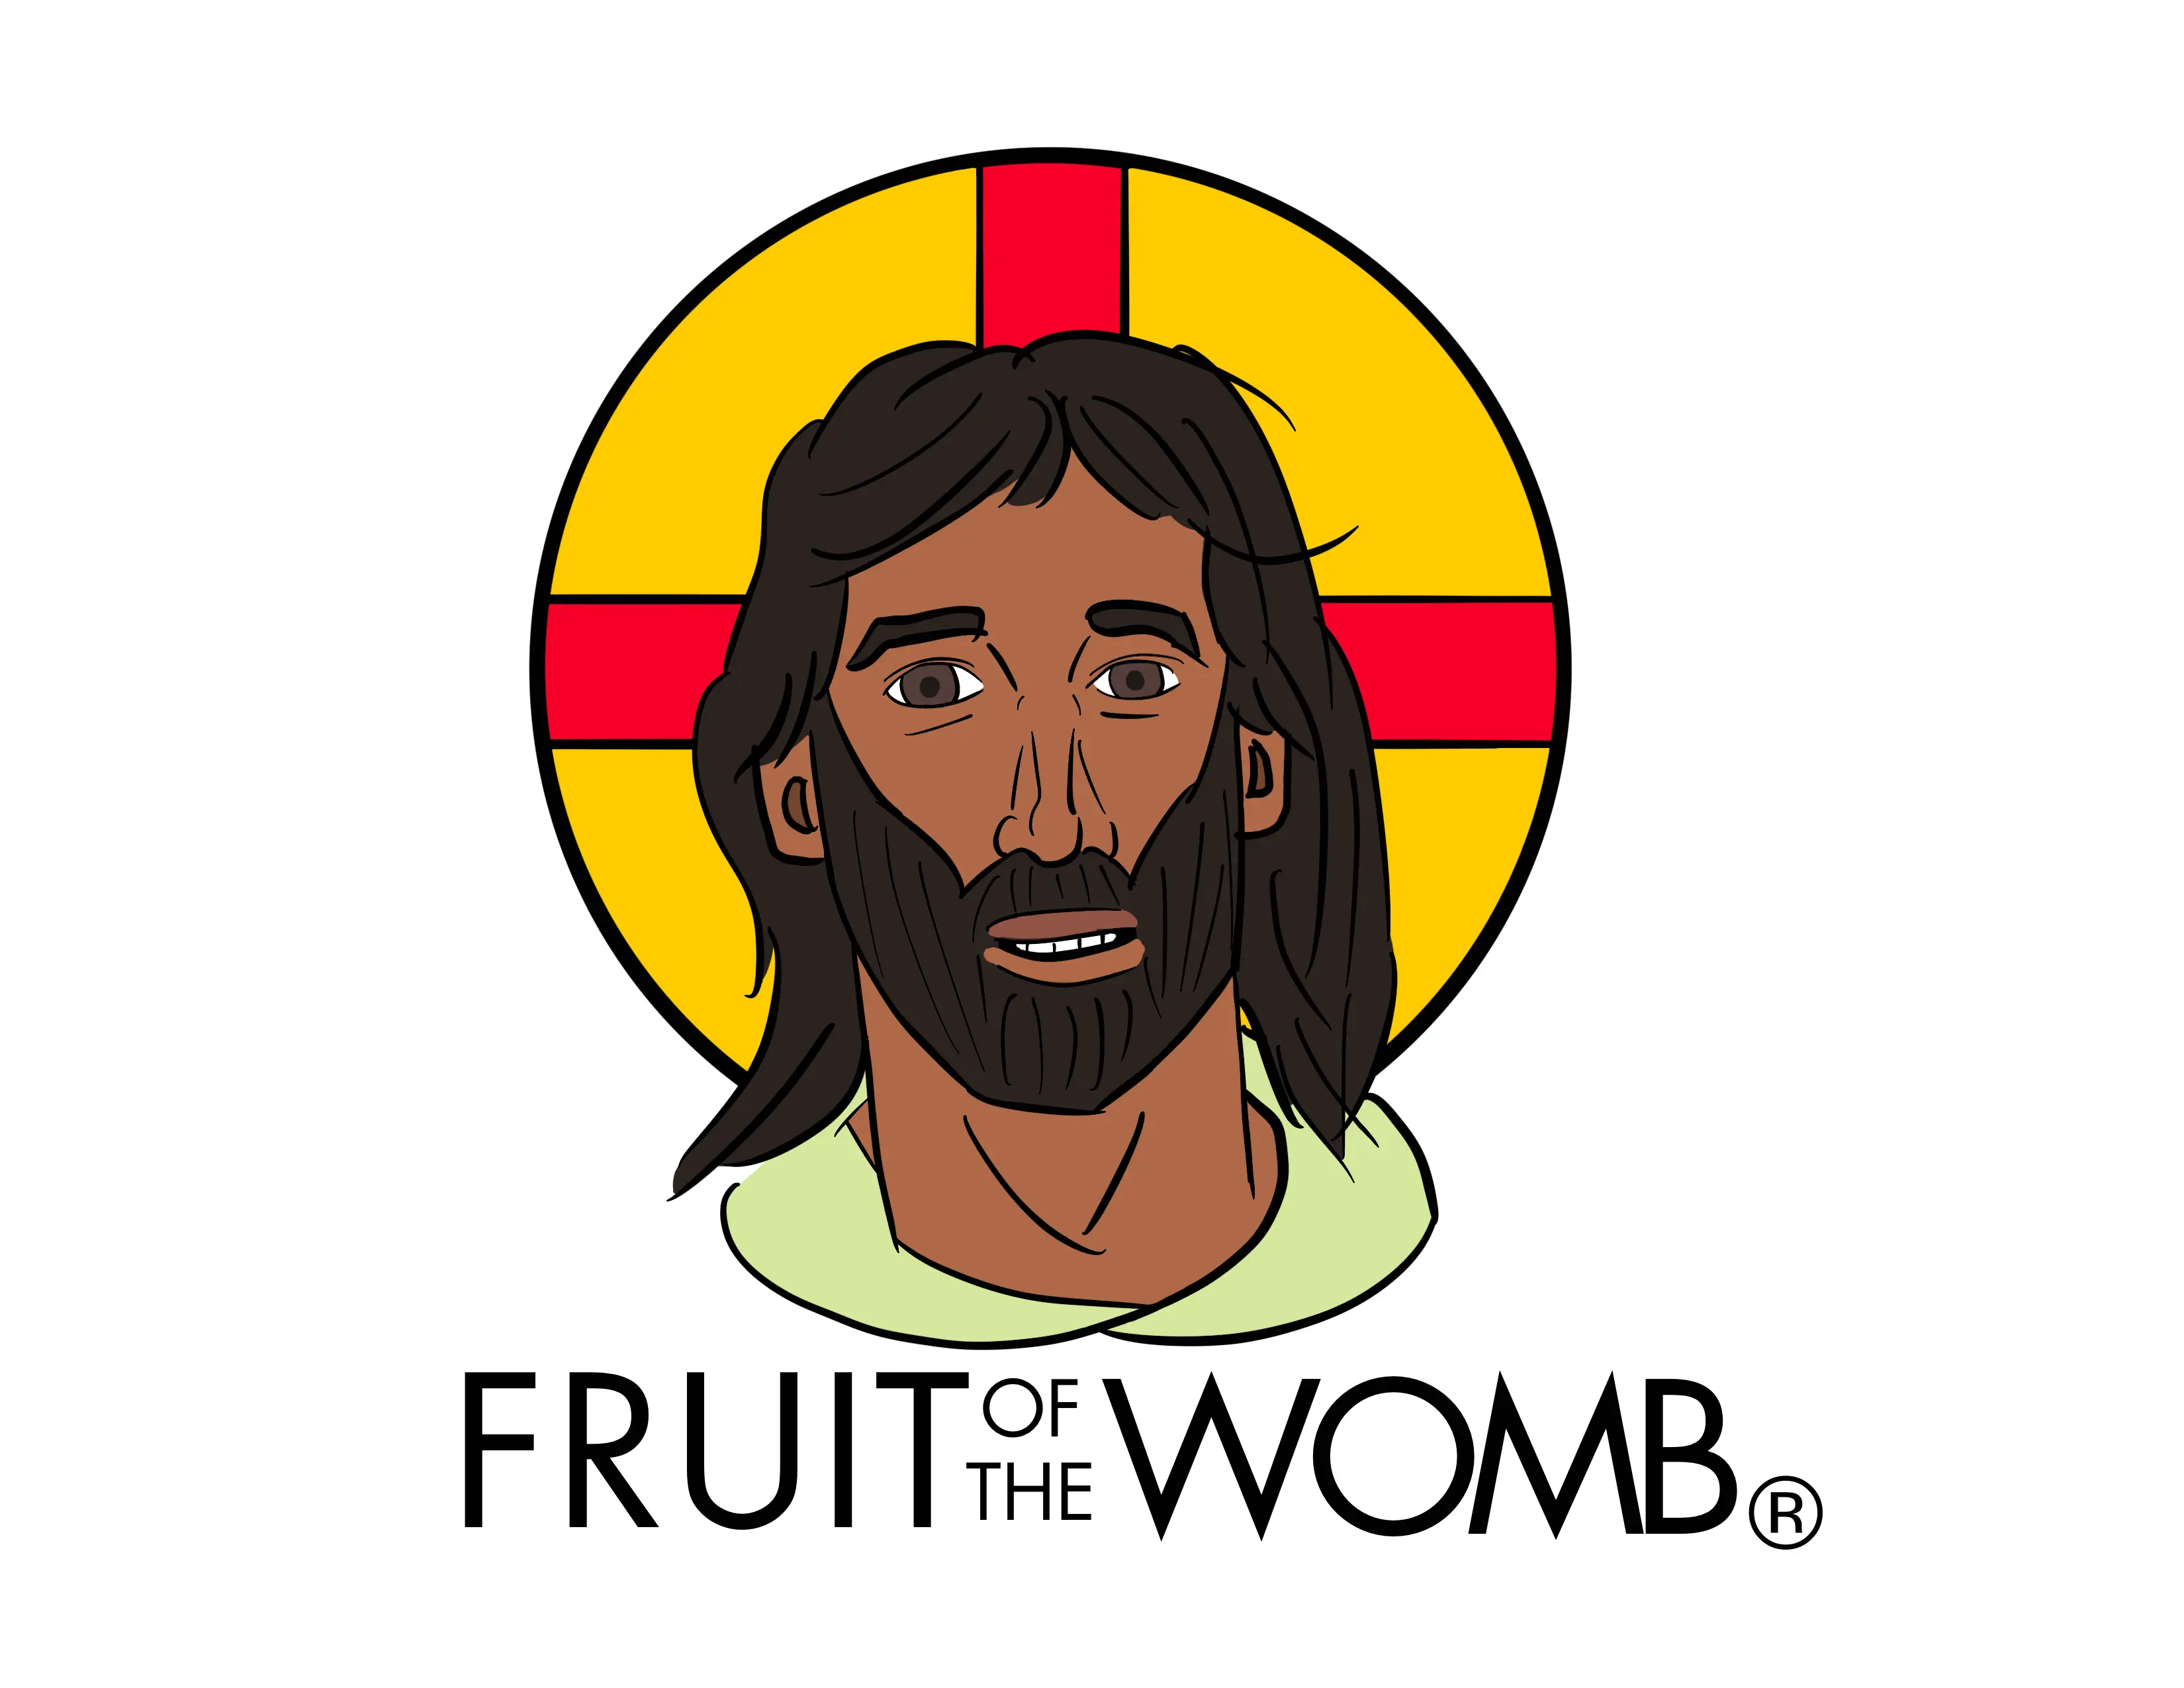 image from Fruit of the Womb